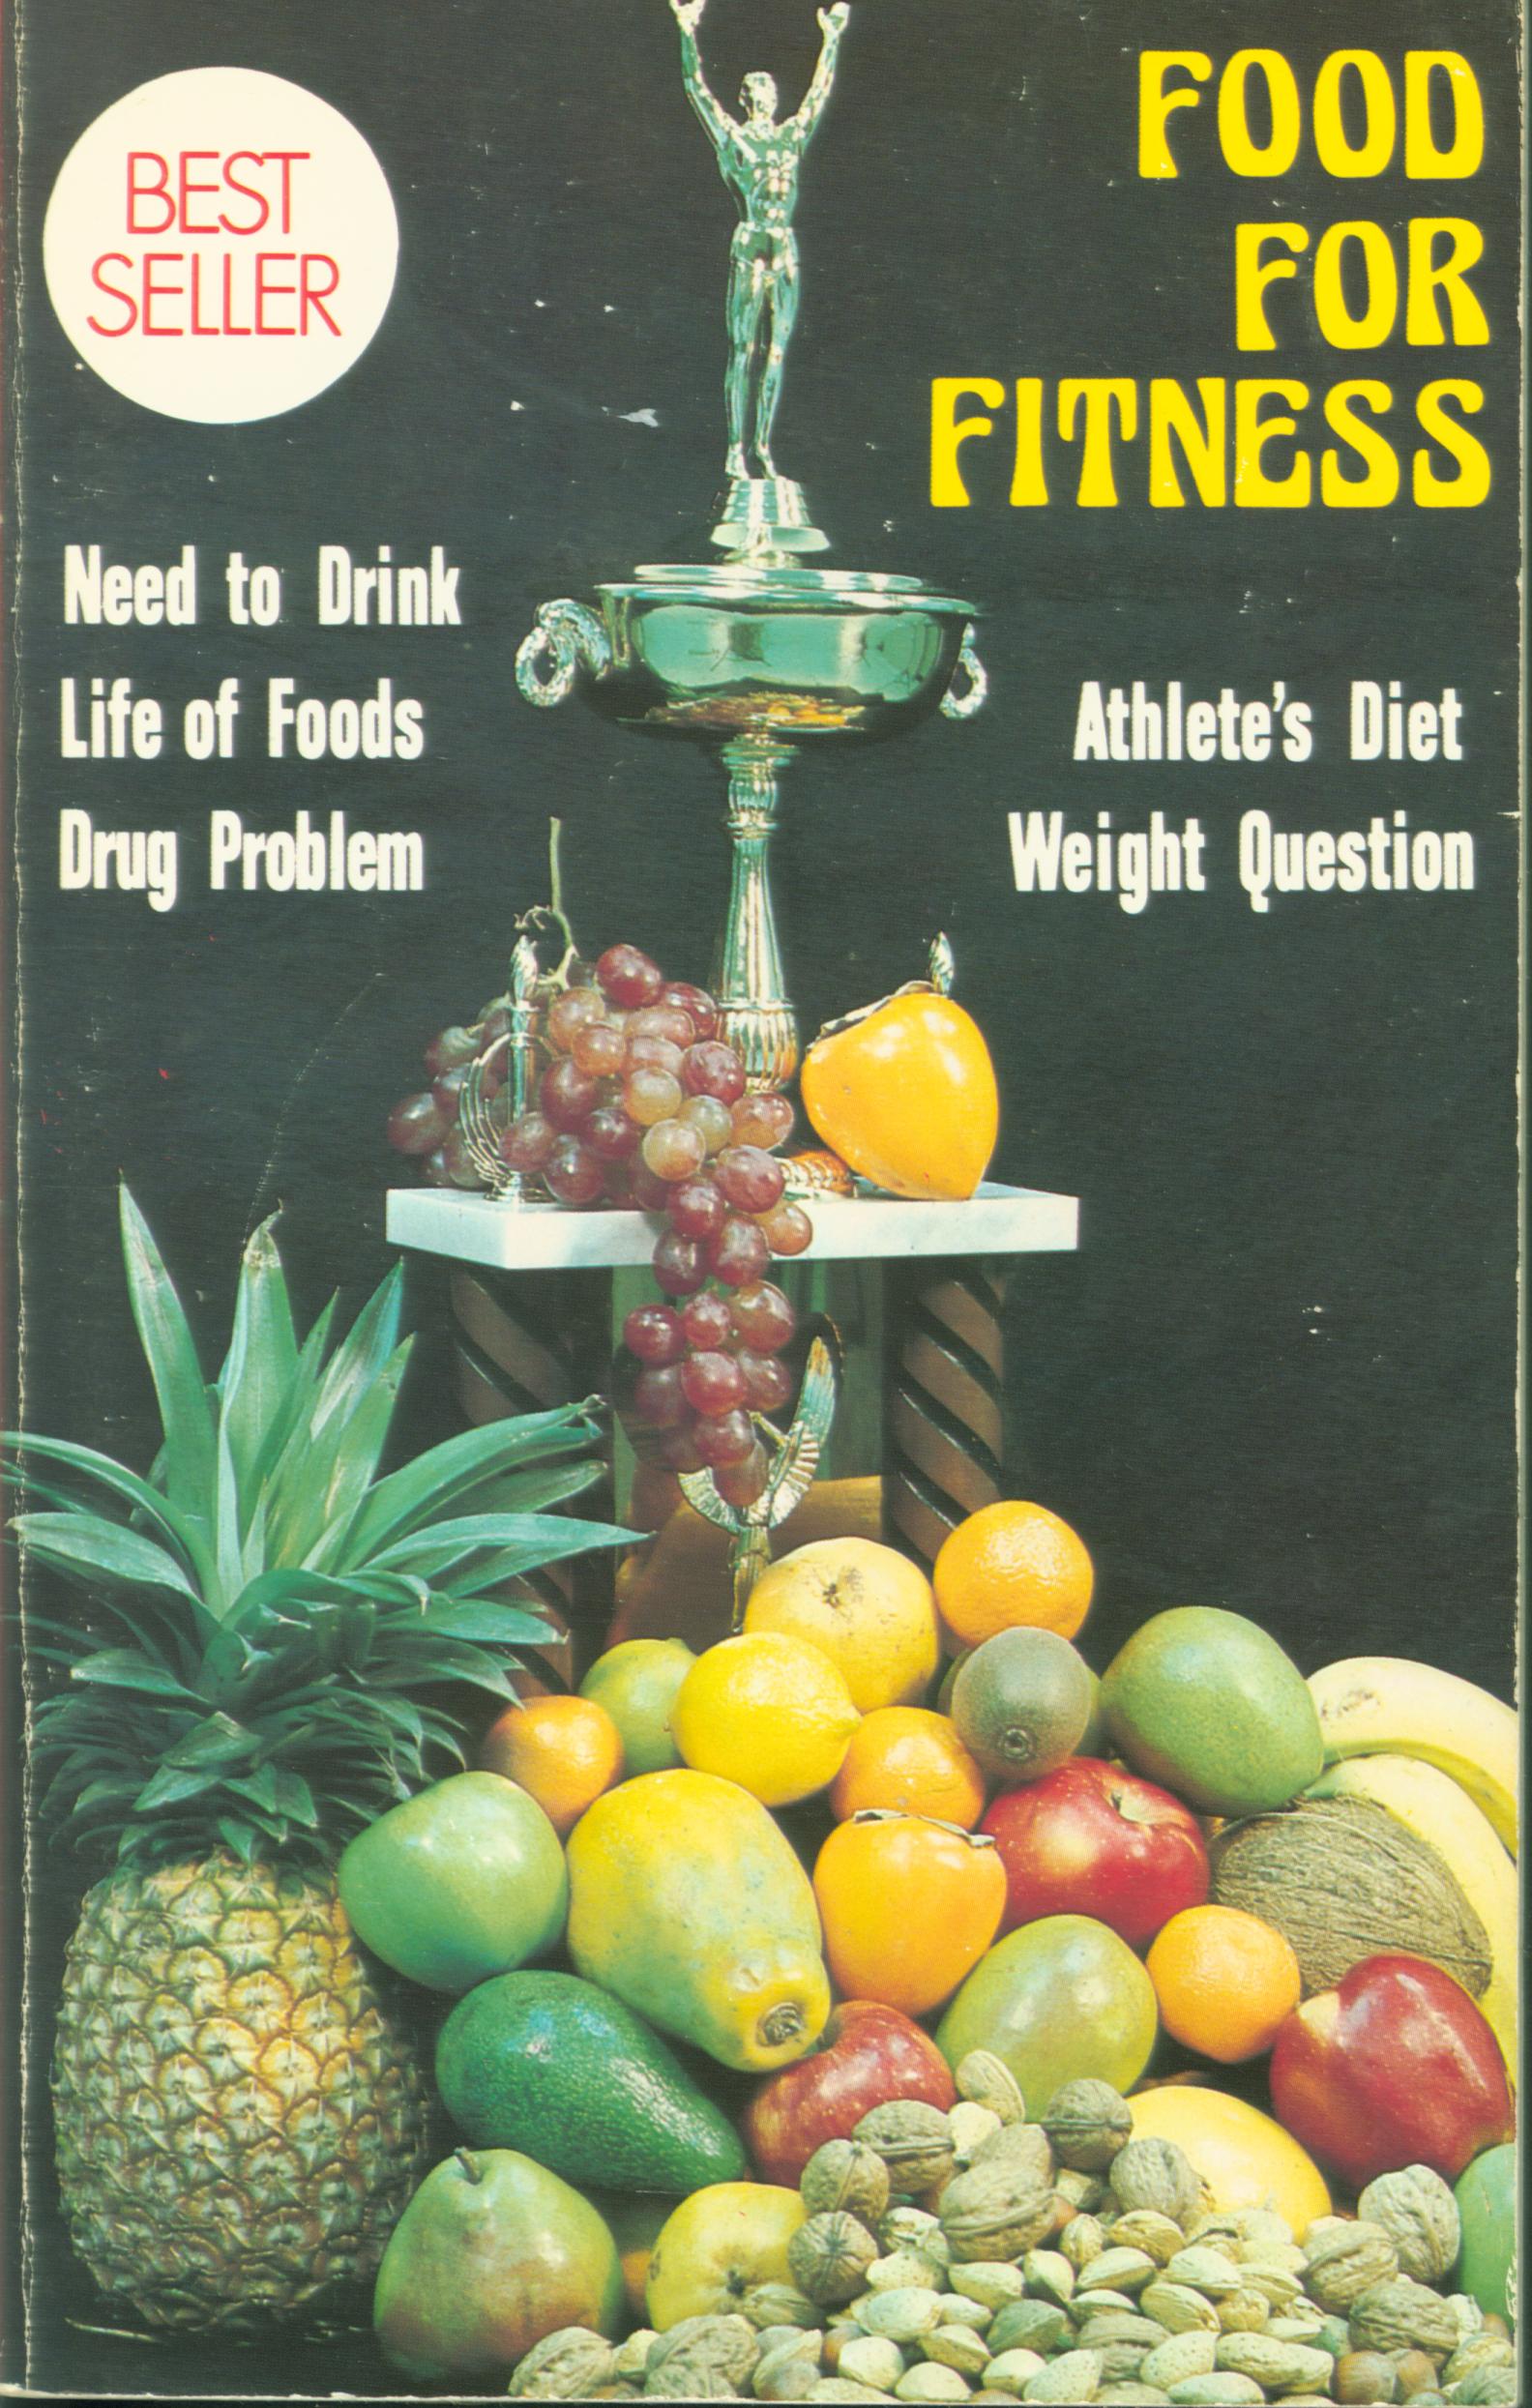 FOOD FOR FITNESS. 